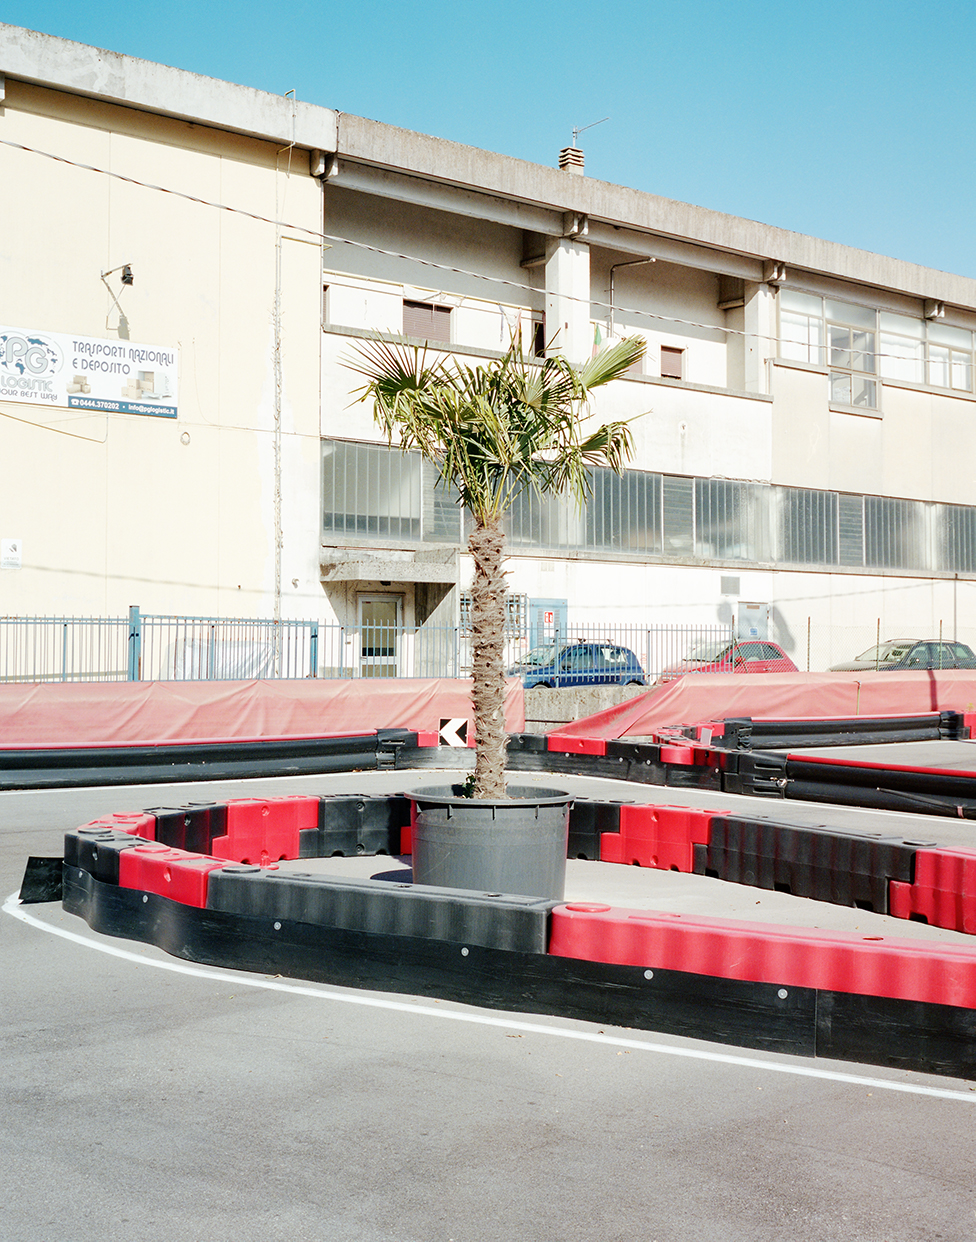  Tavernelle, 2018, Italy
A go kart track along the Padana Superiore road nearby Vicenza 